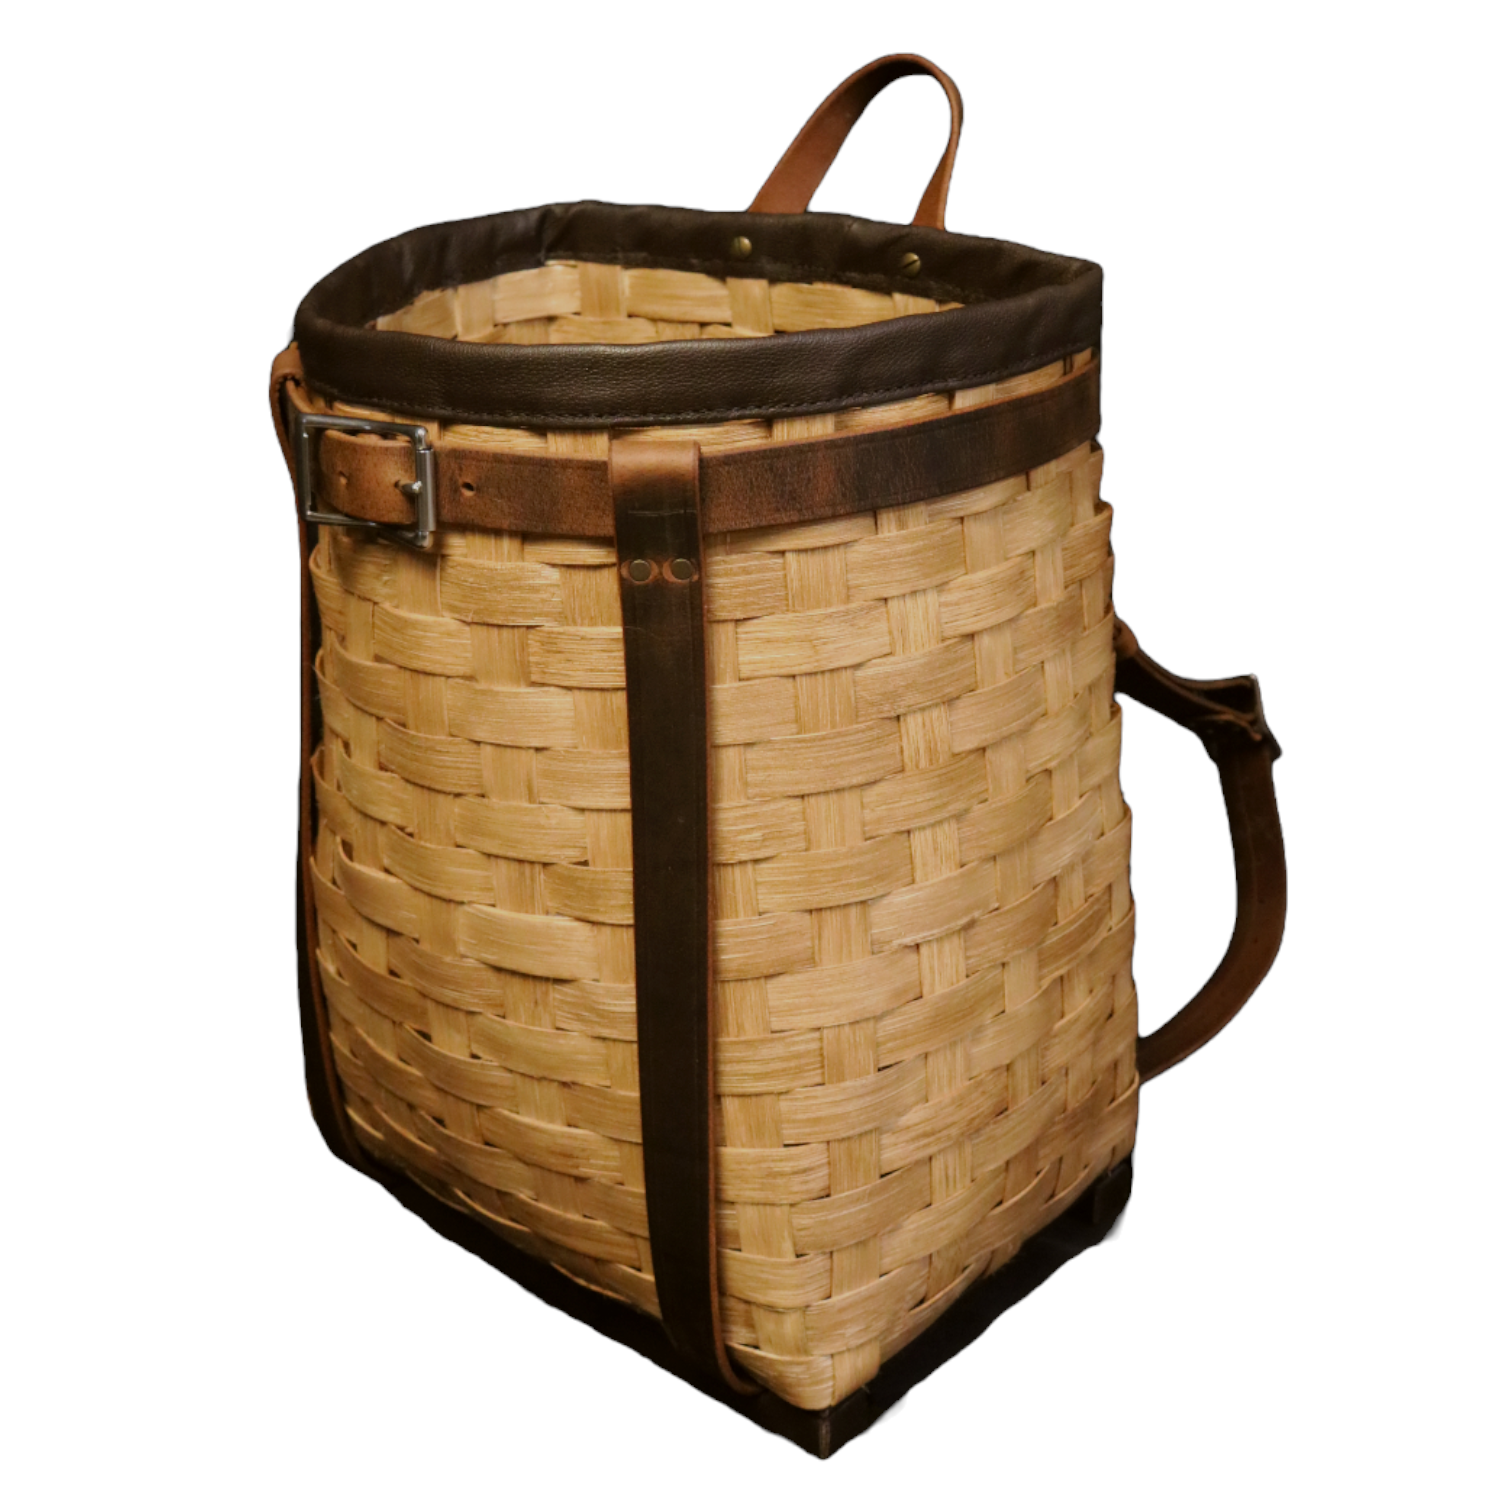 Adirondack Pack Basket Handwoven Reed with Leather Straps and Silver Buckles